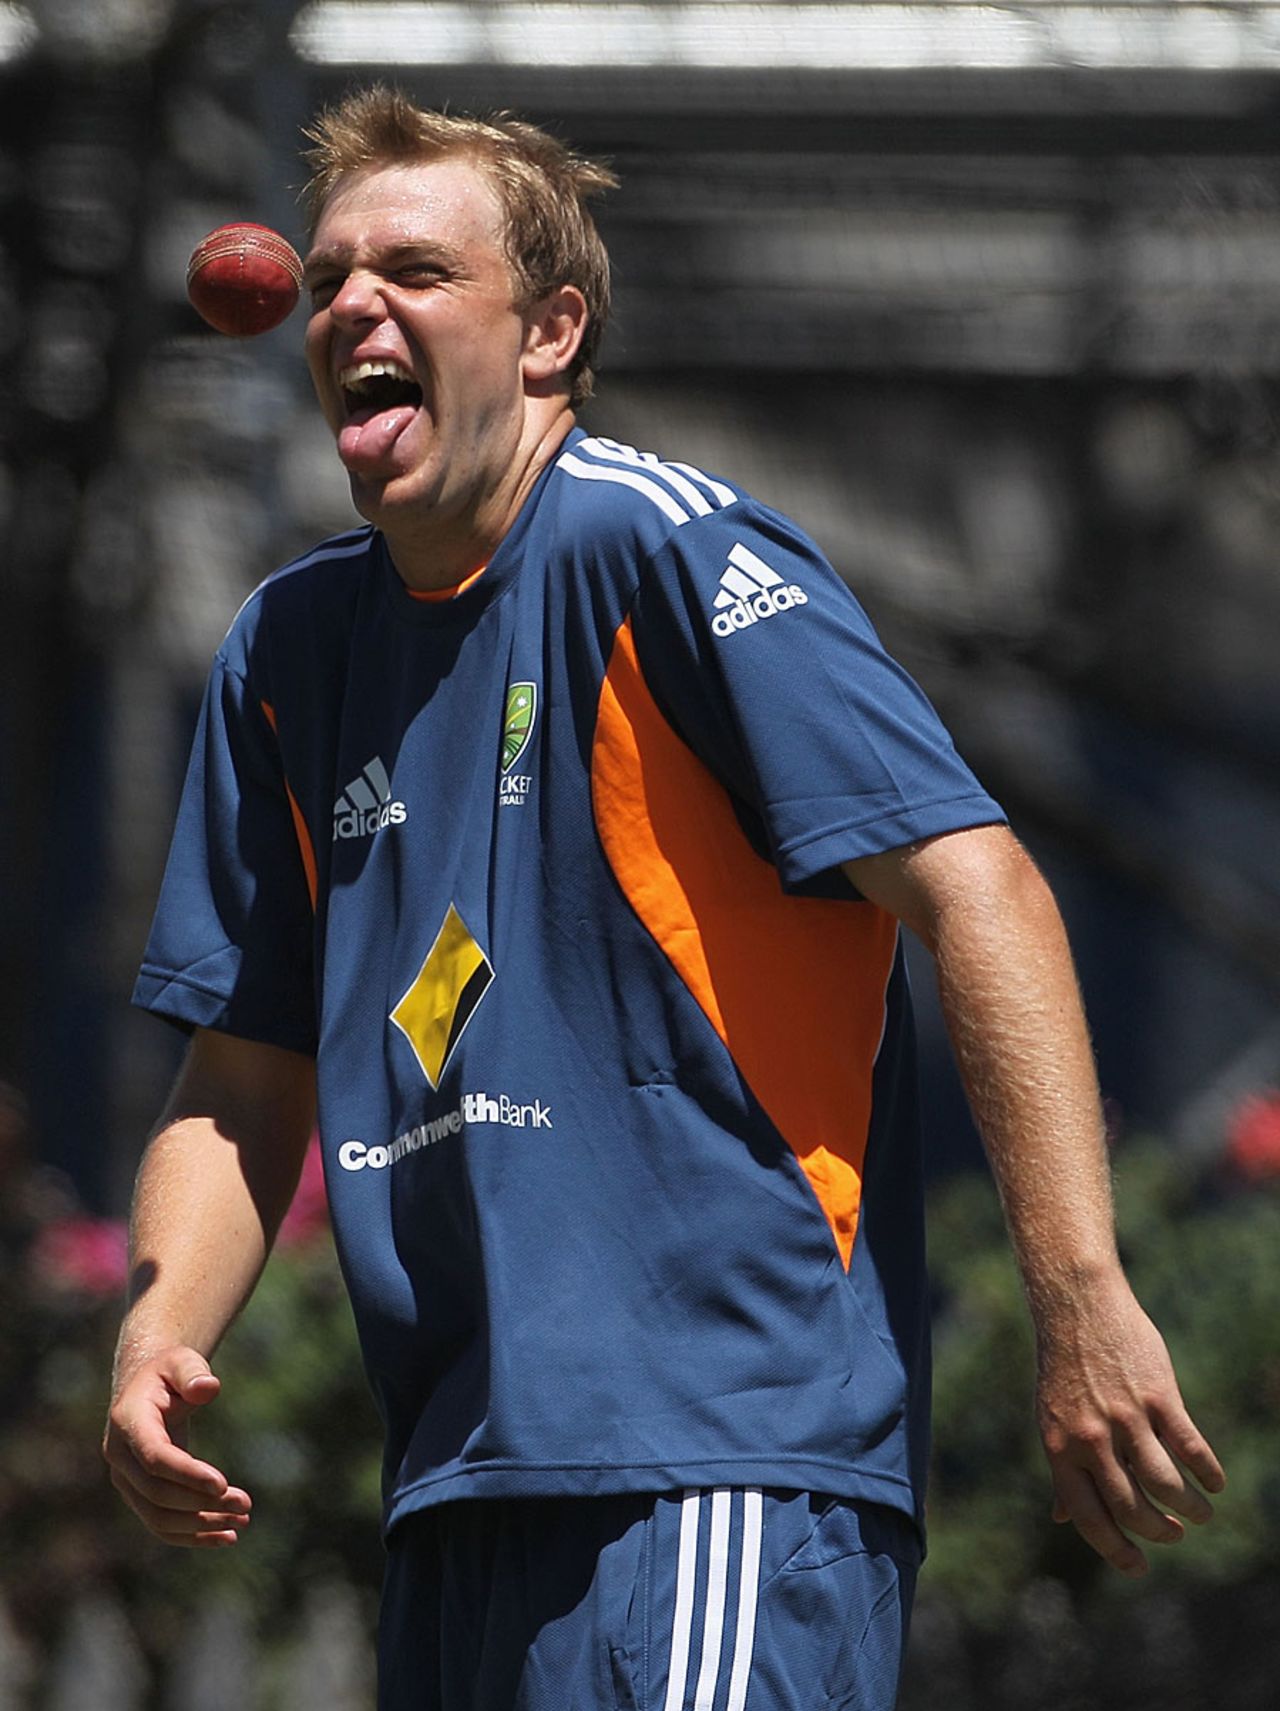 Michael Beer has a laugh during training, Perth, December 14, 2010